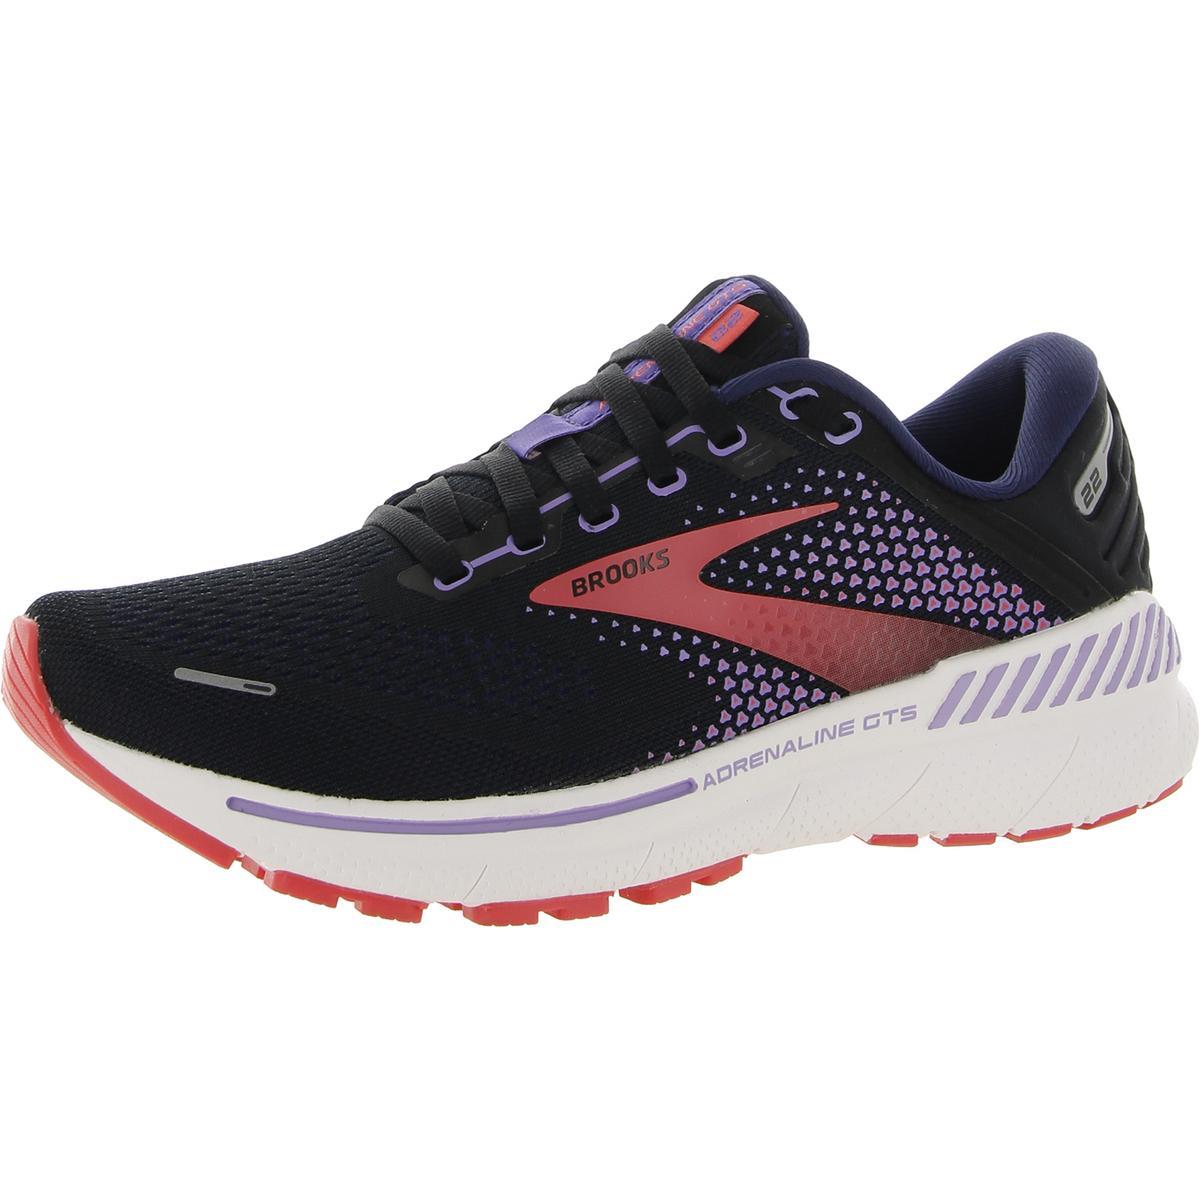 Brooks Womens Adrenaline Gts 22 Athletic and Training Shoes Sneakers Bhfo 7537 Black/Purple/Coral